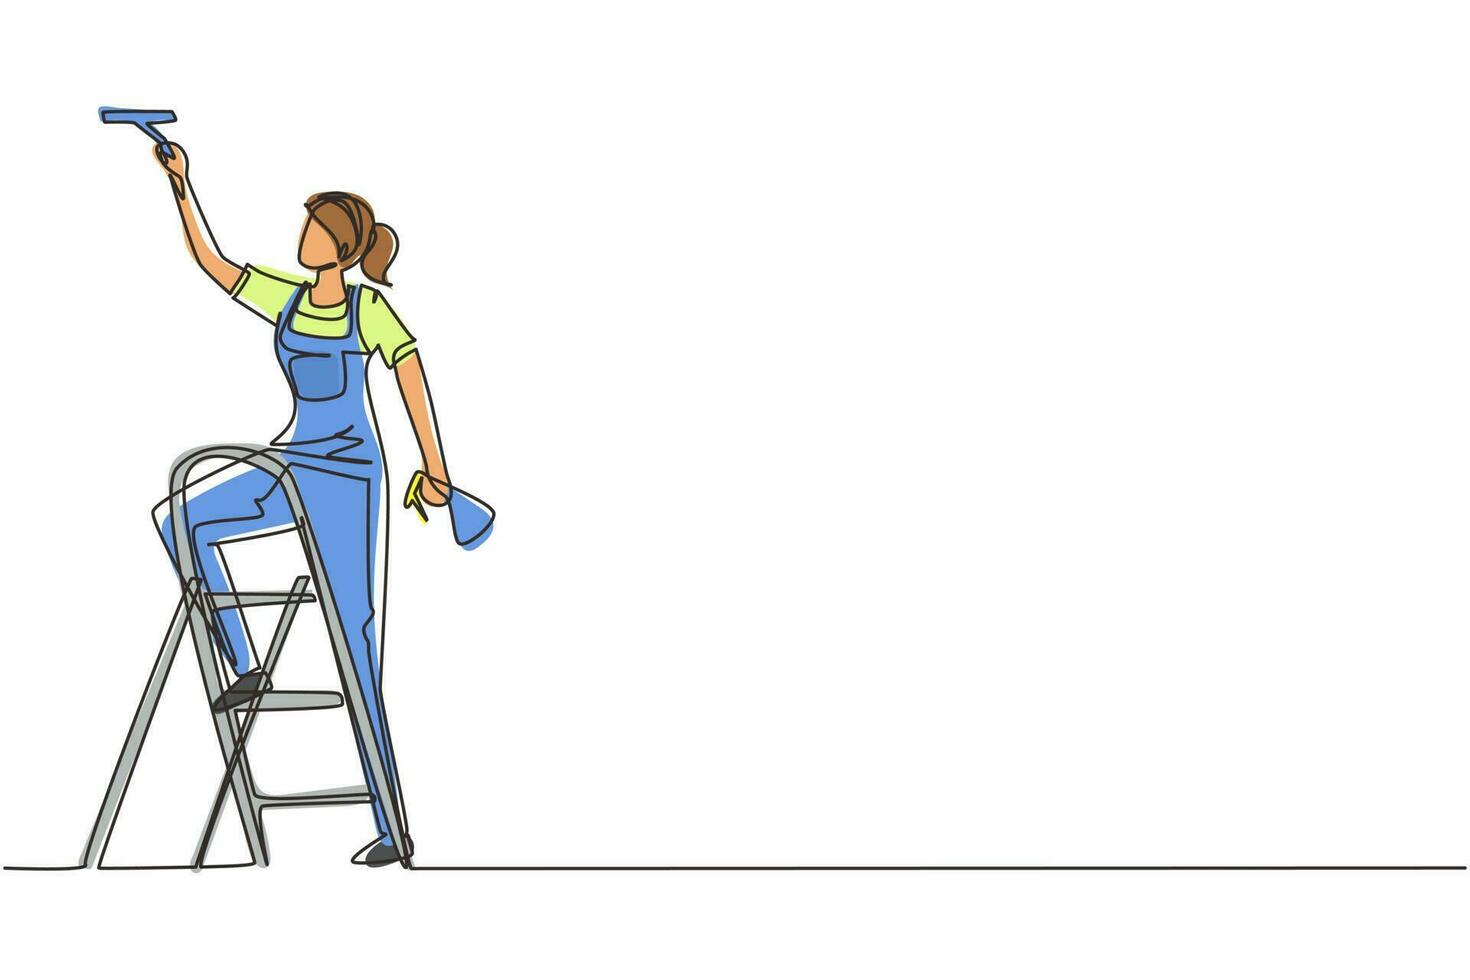 Single one line drawing woman cleaner standing on ladder, washing with wiper. Cleaning service, cleaning tools, washing sponge, house cleaning, housework. Continuous line design vector illustration